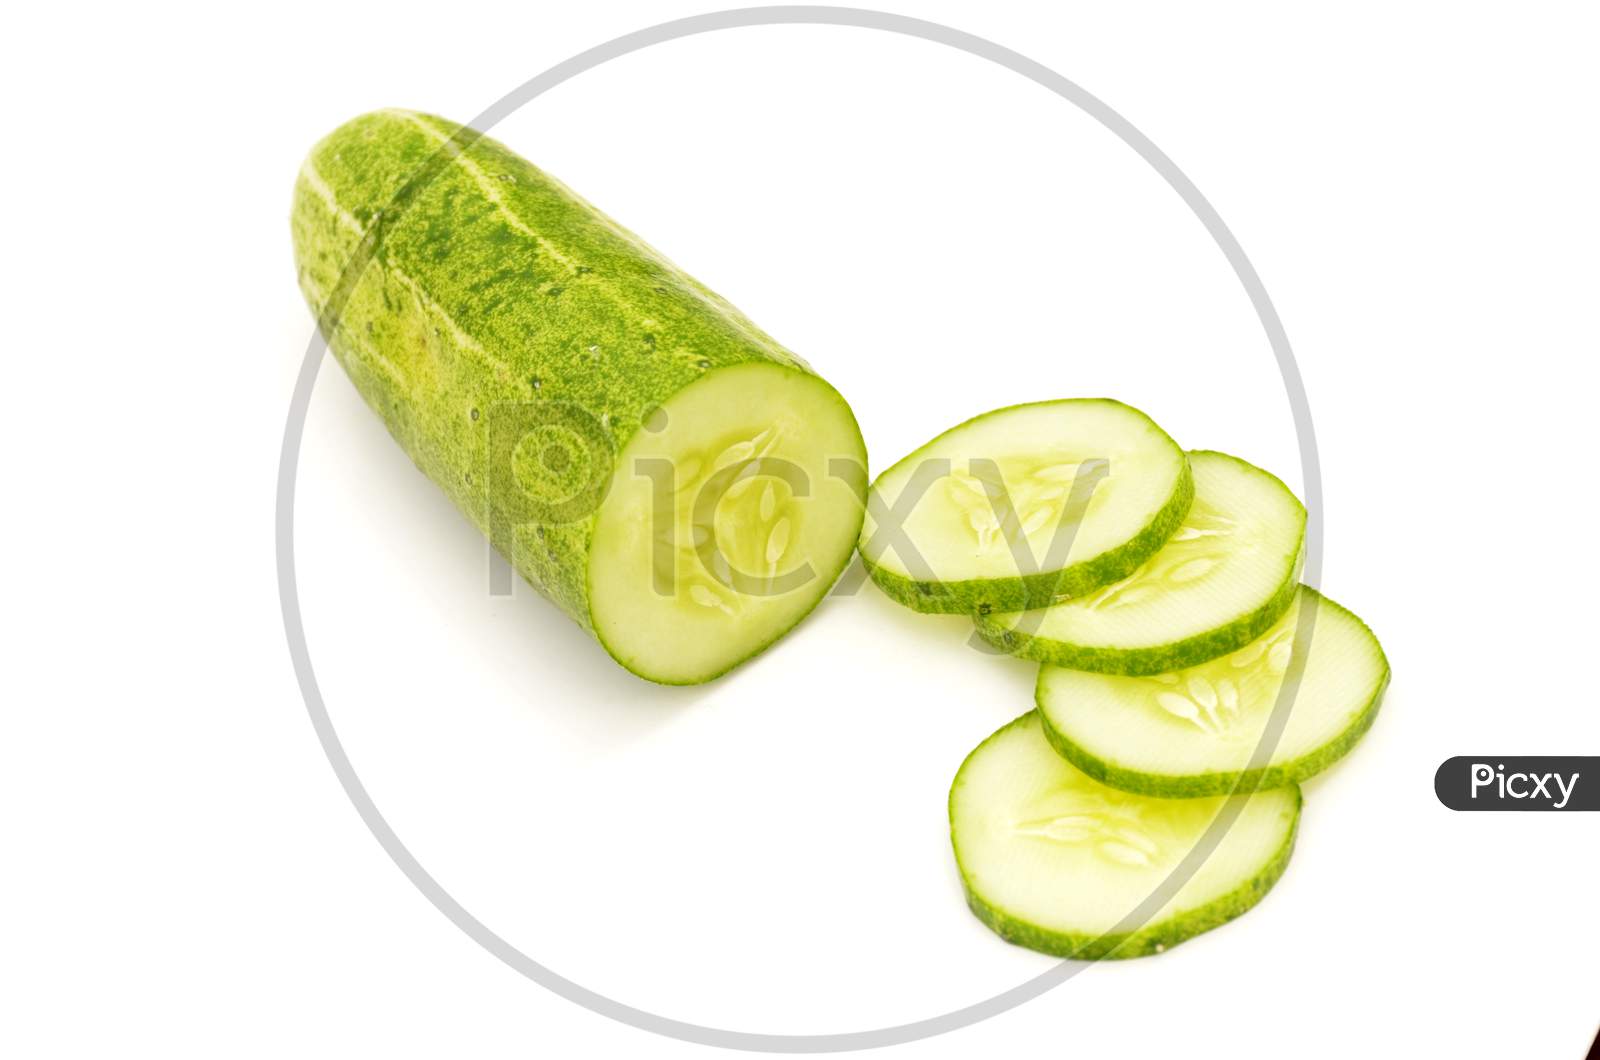 ripe cucumber with sliced on white background.